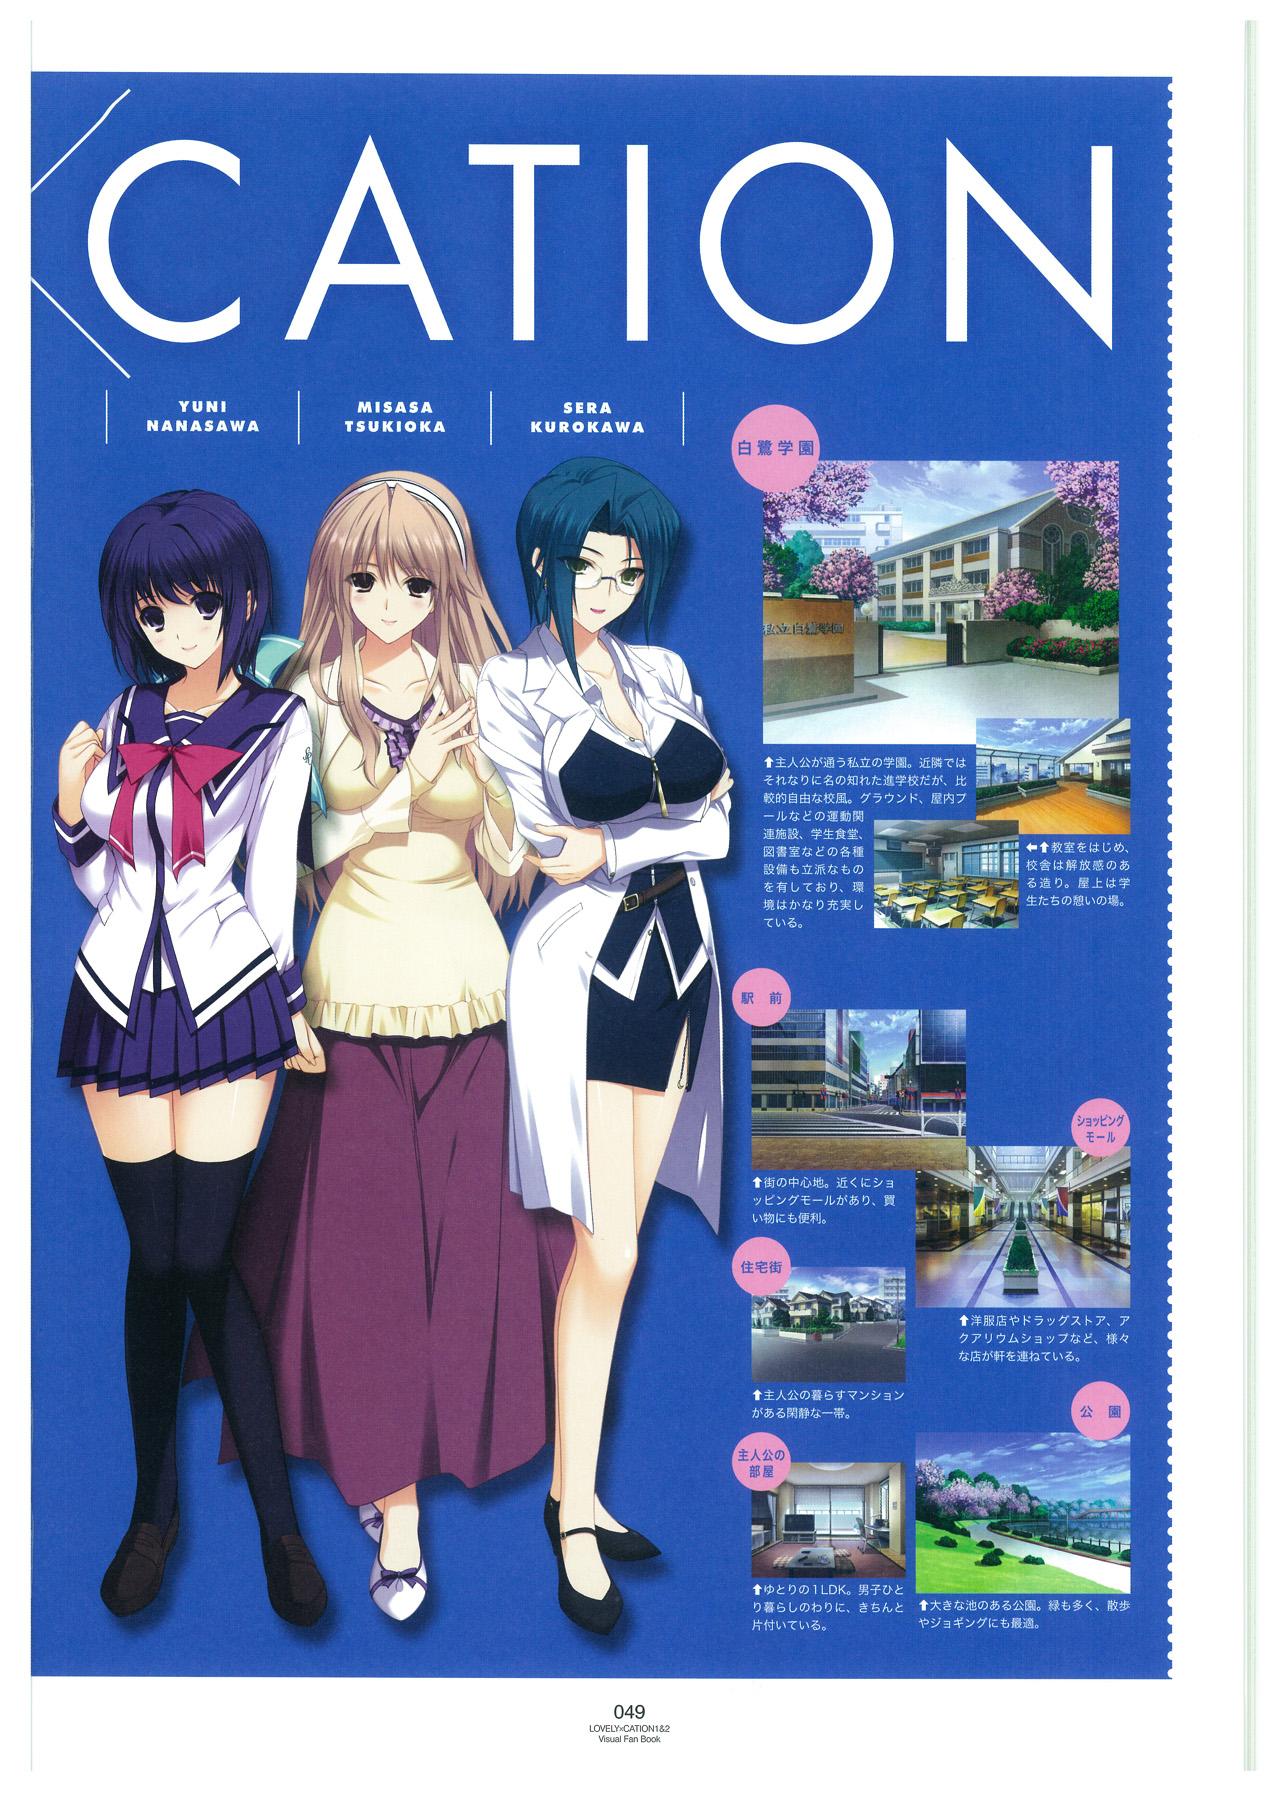 LOVELY CATION 1&2 VISUAL FAN BOOK 51